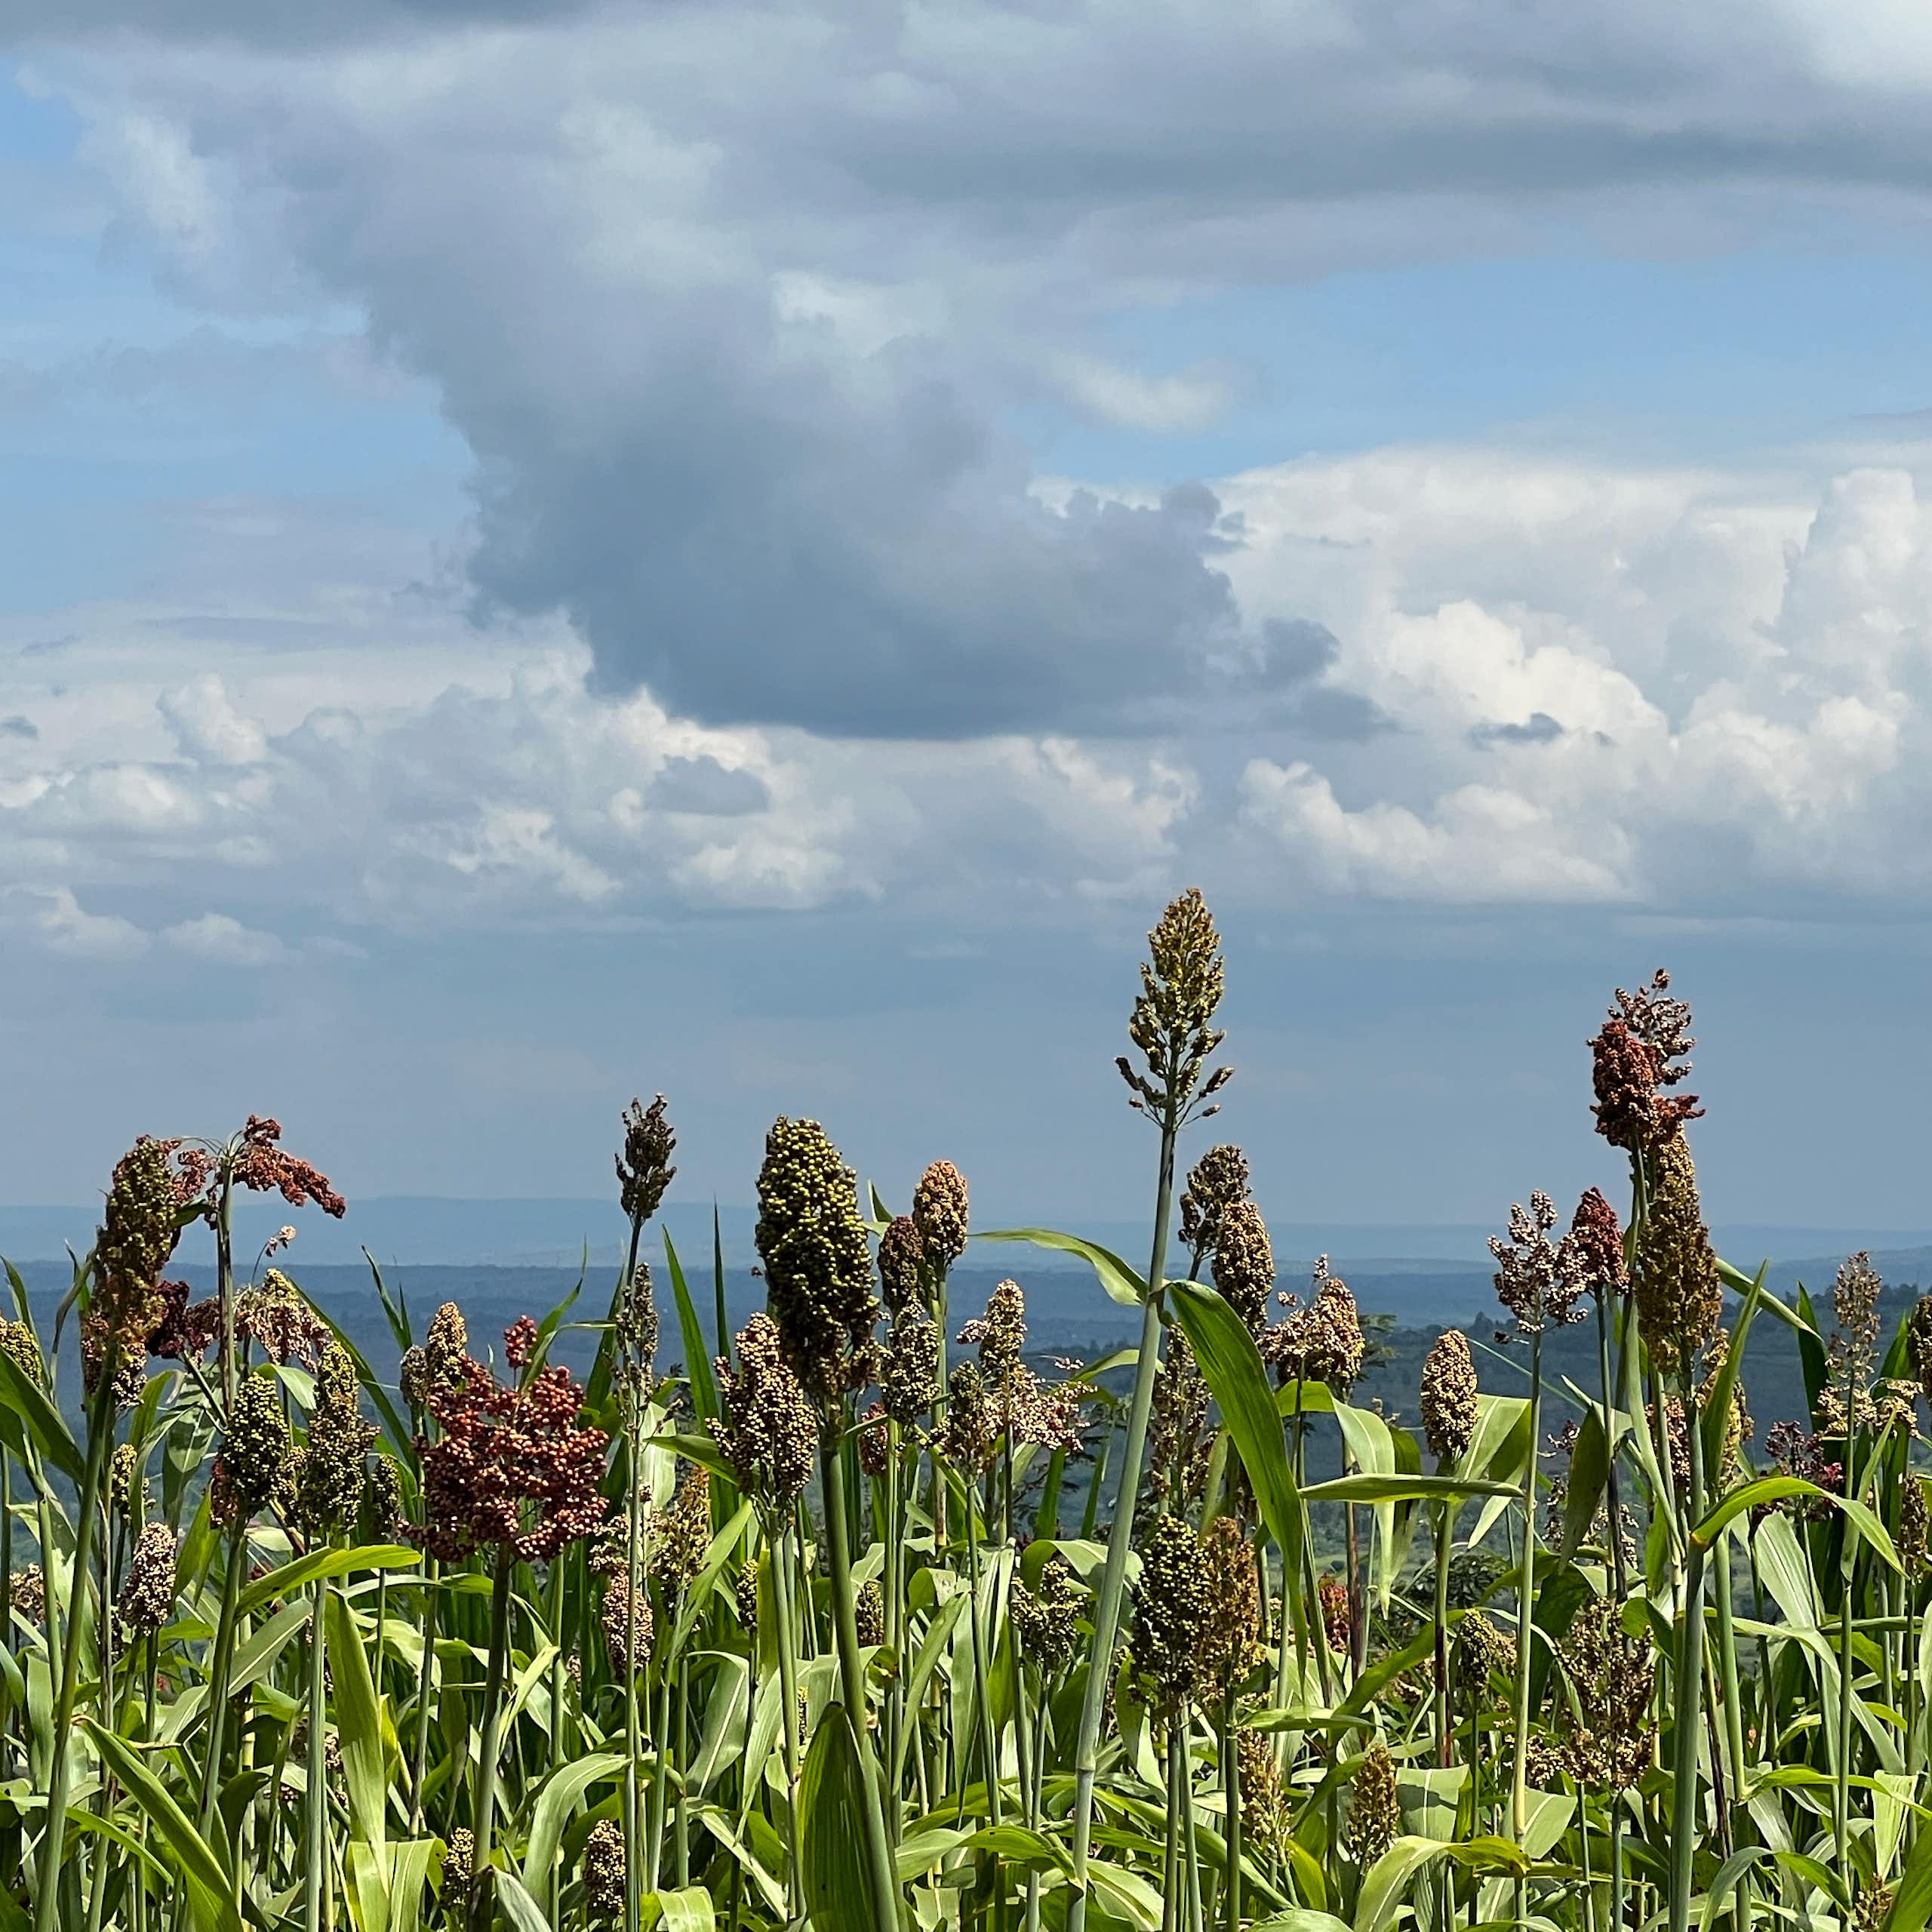 Sweet sorghum is a hardy, nutritious, biofuel crop that offers solutions in drought-hit southern Africa